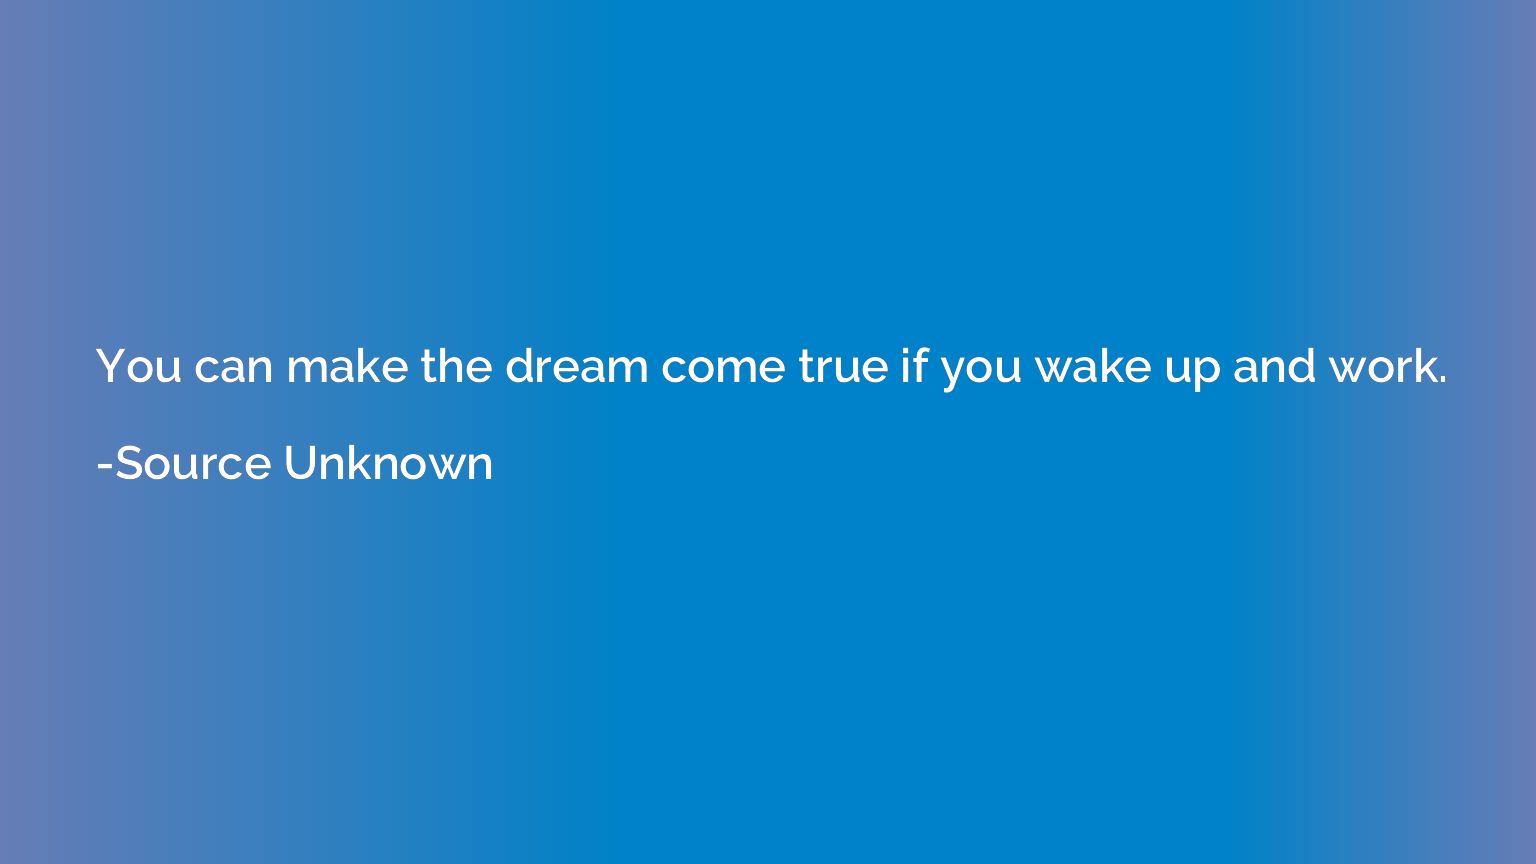 You can make the dream come true if you wake up and work.